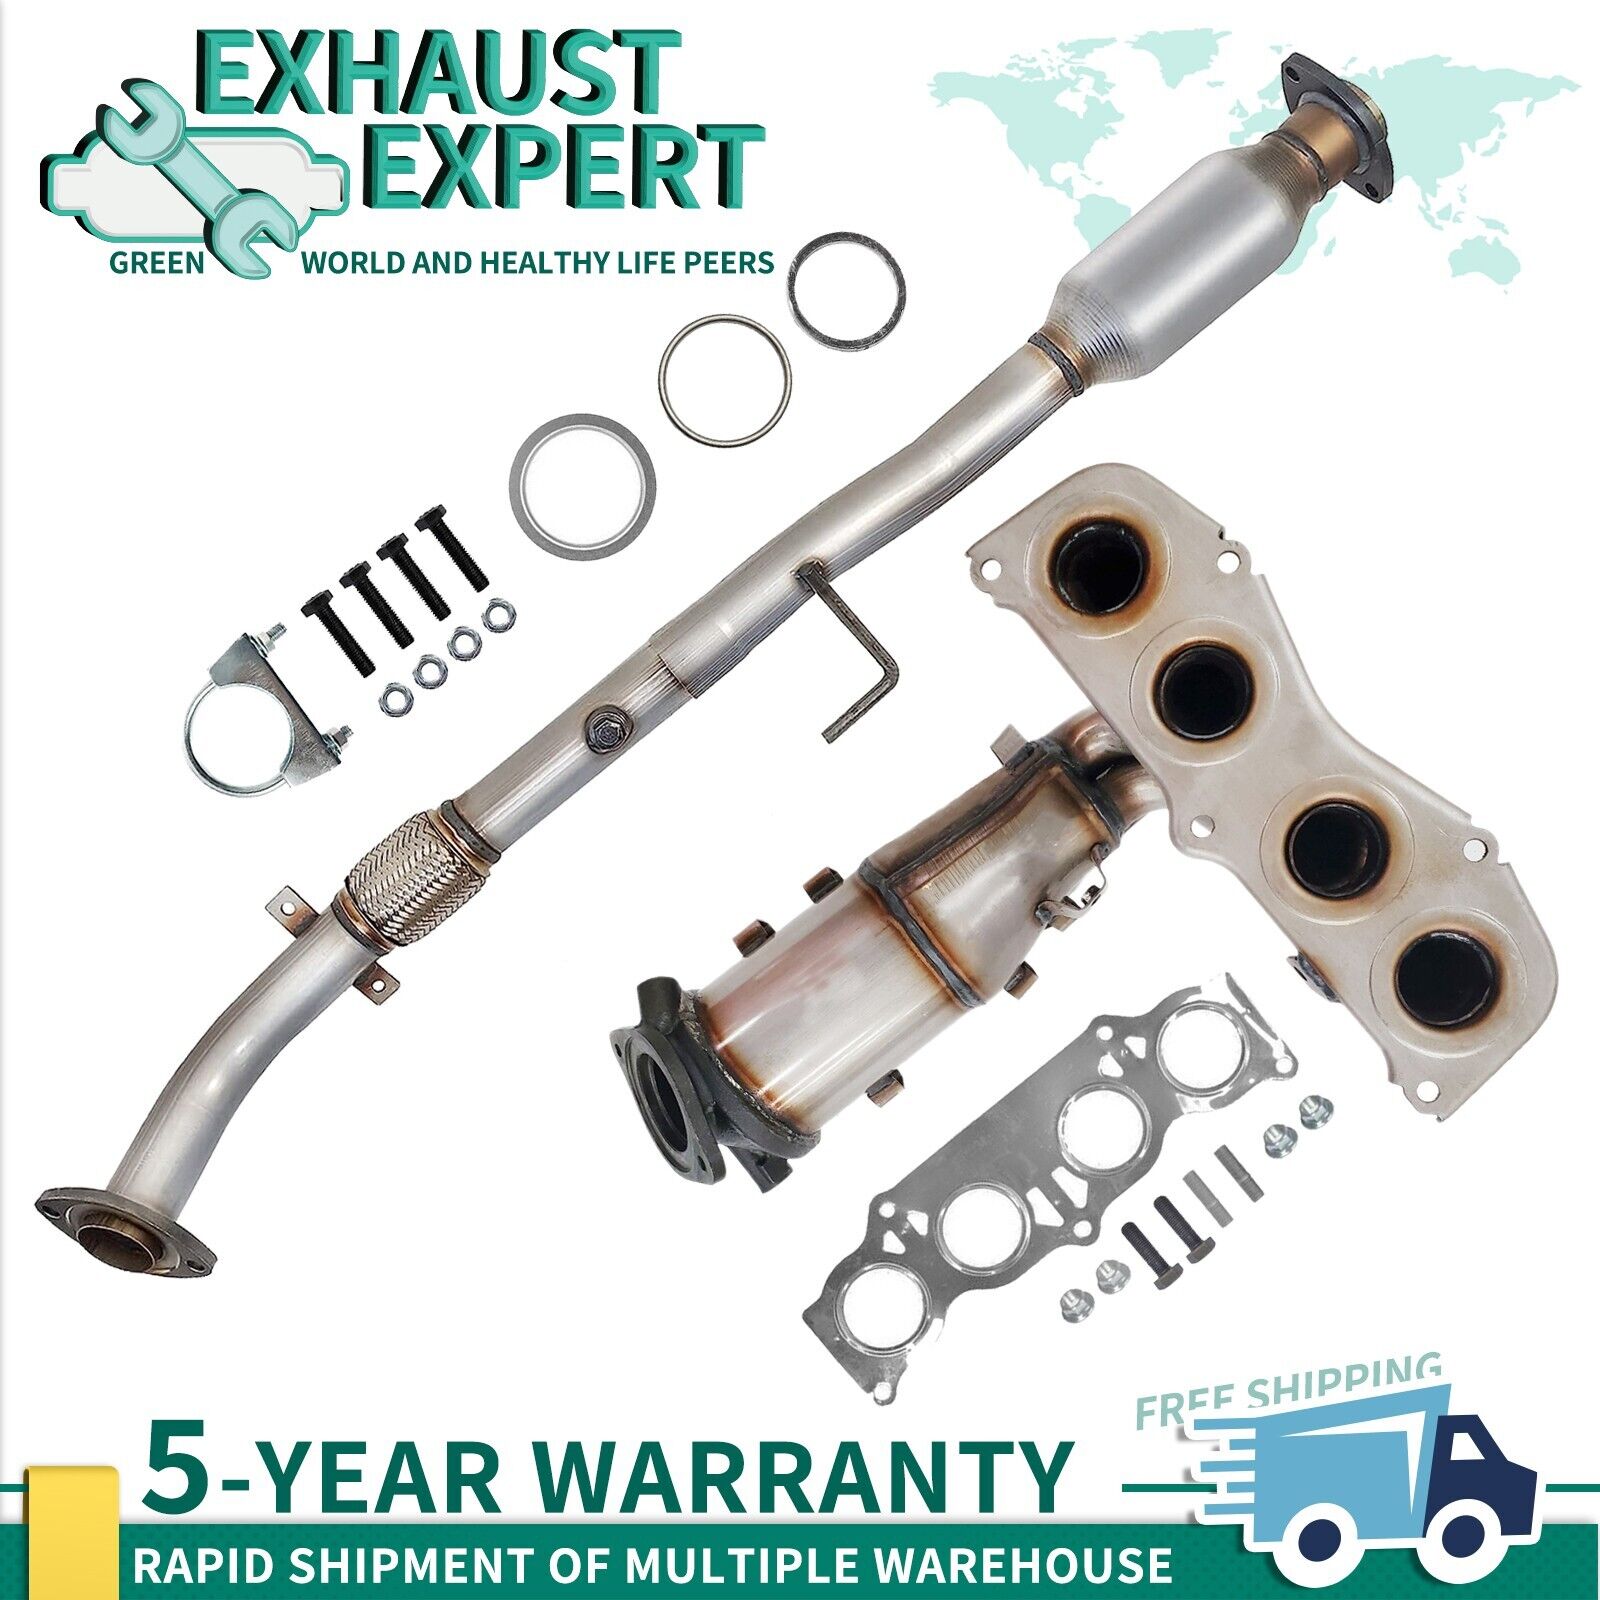 2X Catalytic Converter for 2007 2008 2009 Toyota Camry 2.4L EPA OBD II Approved